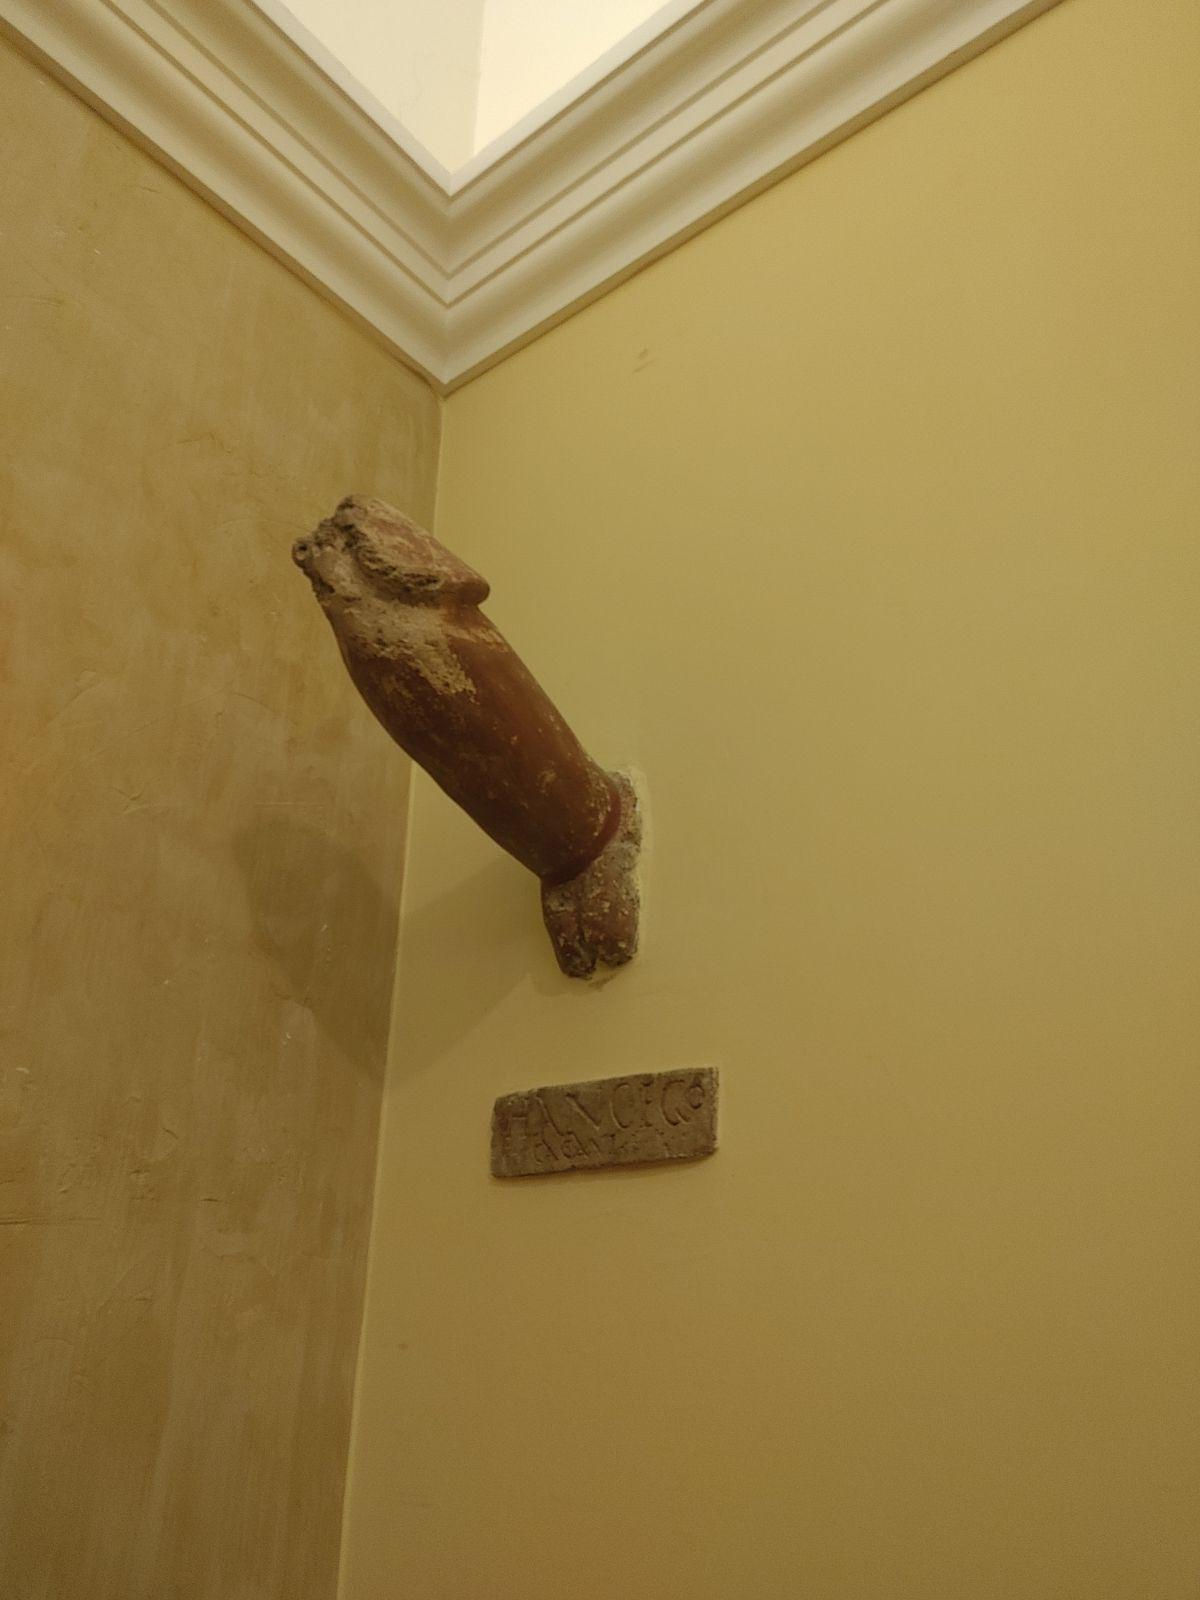 Preserved object that was attached to the wall above the entrance to a shop in Pompeii. The artifact is located in the National Archaeological Museum of Naples.jpeg